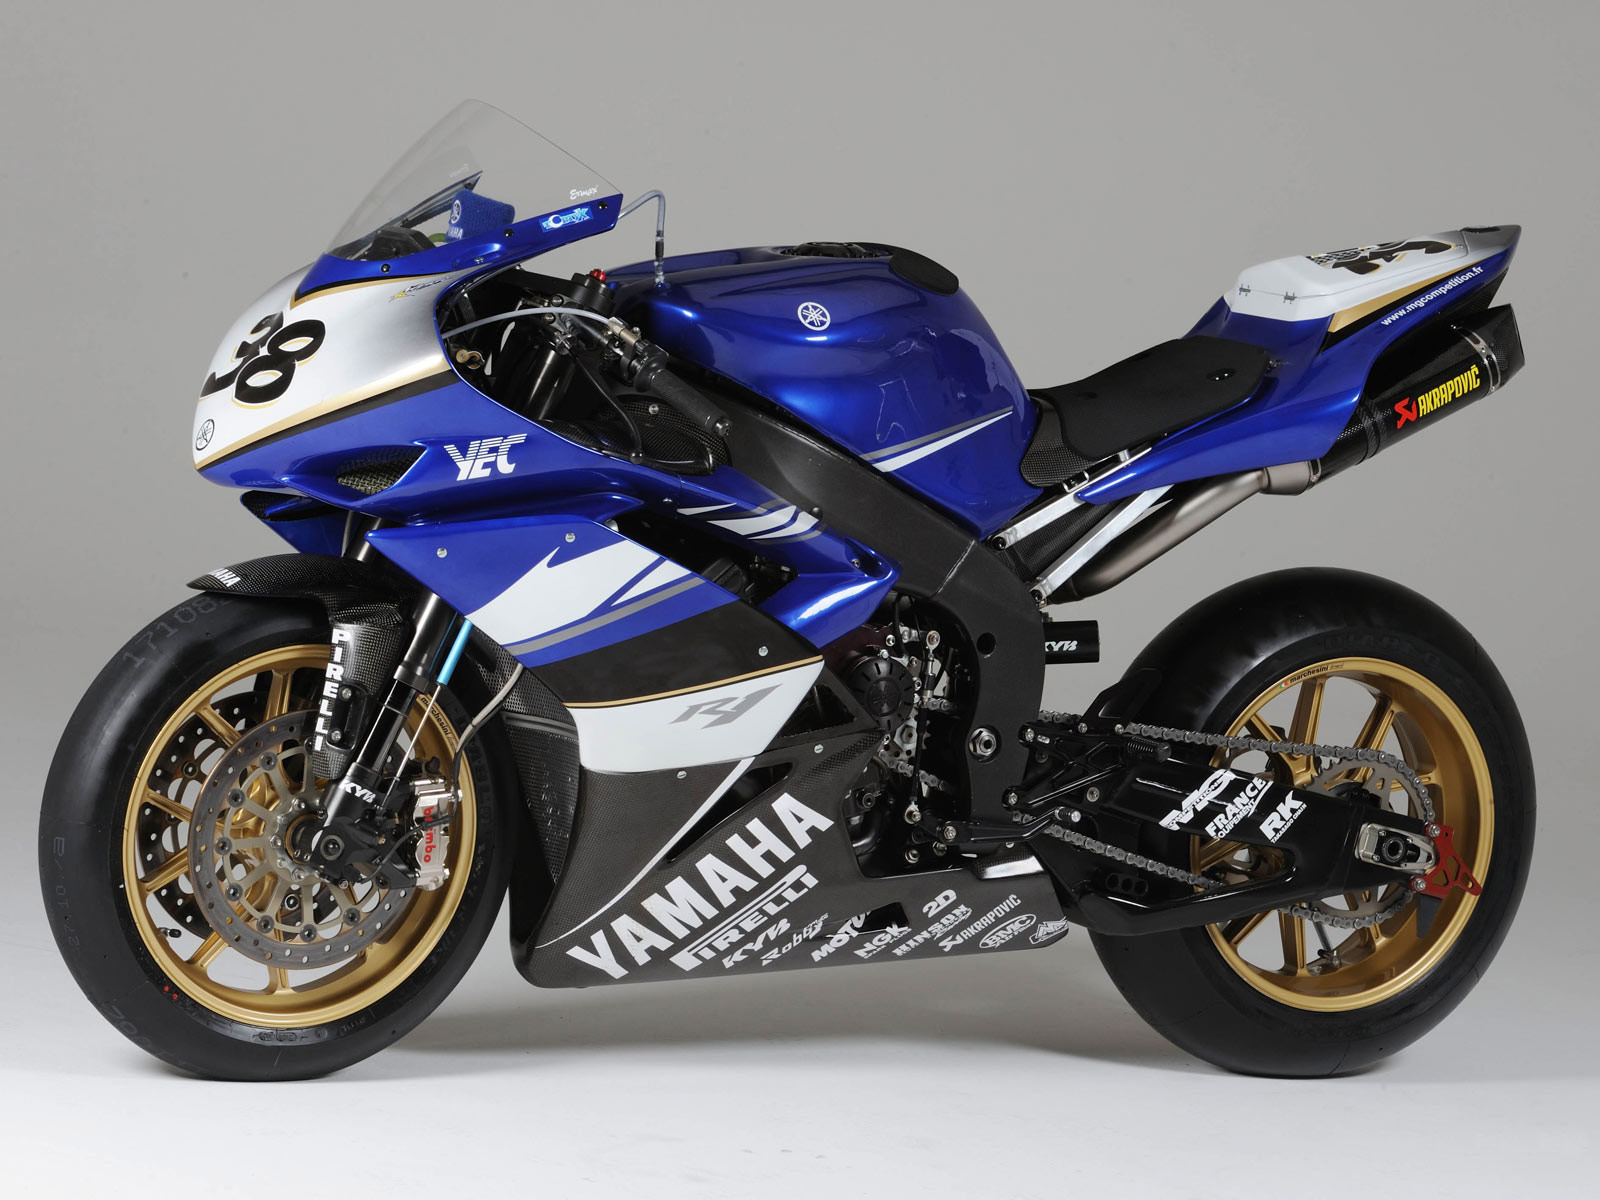 YZF R1 Yamaha pictures 2008 specifications